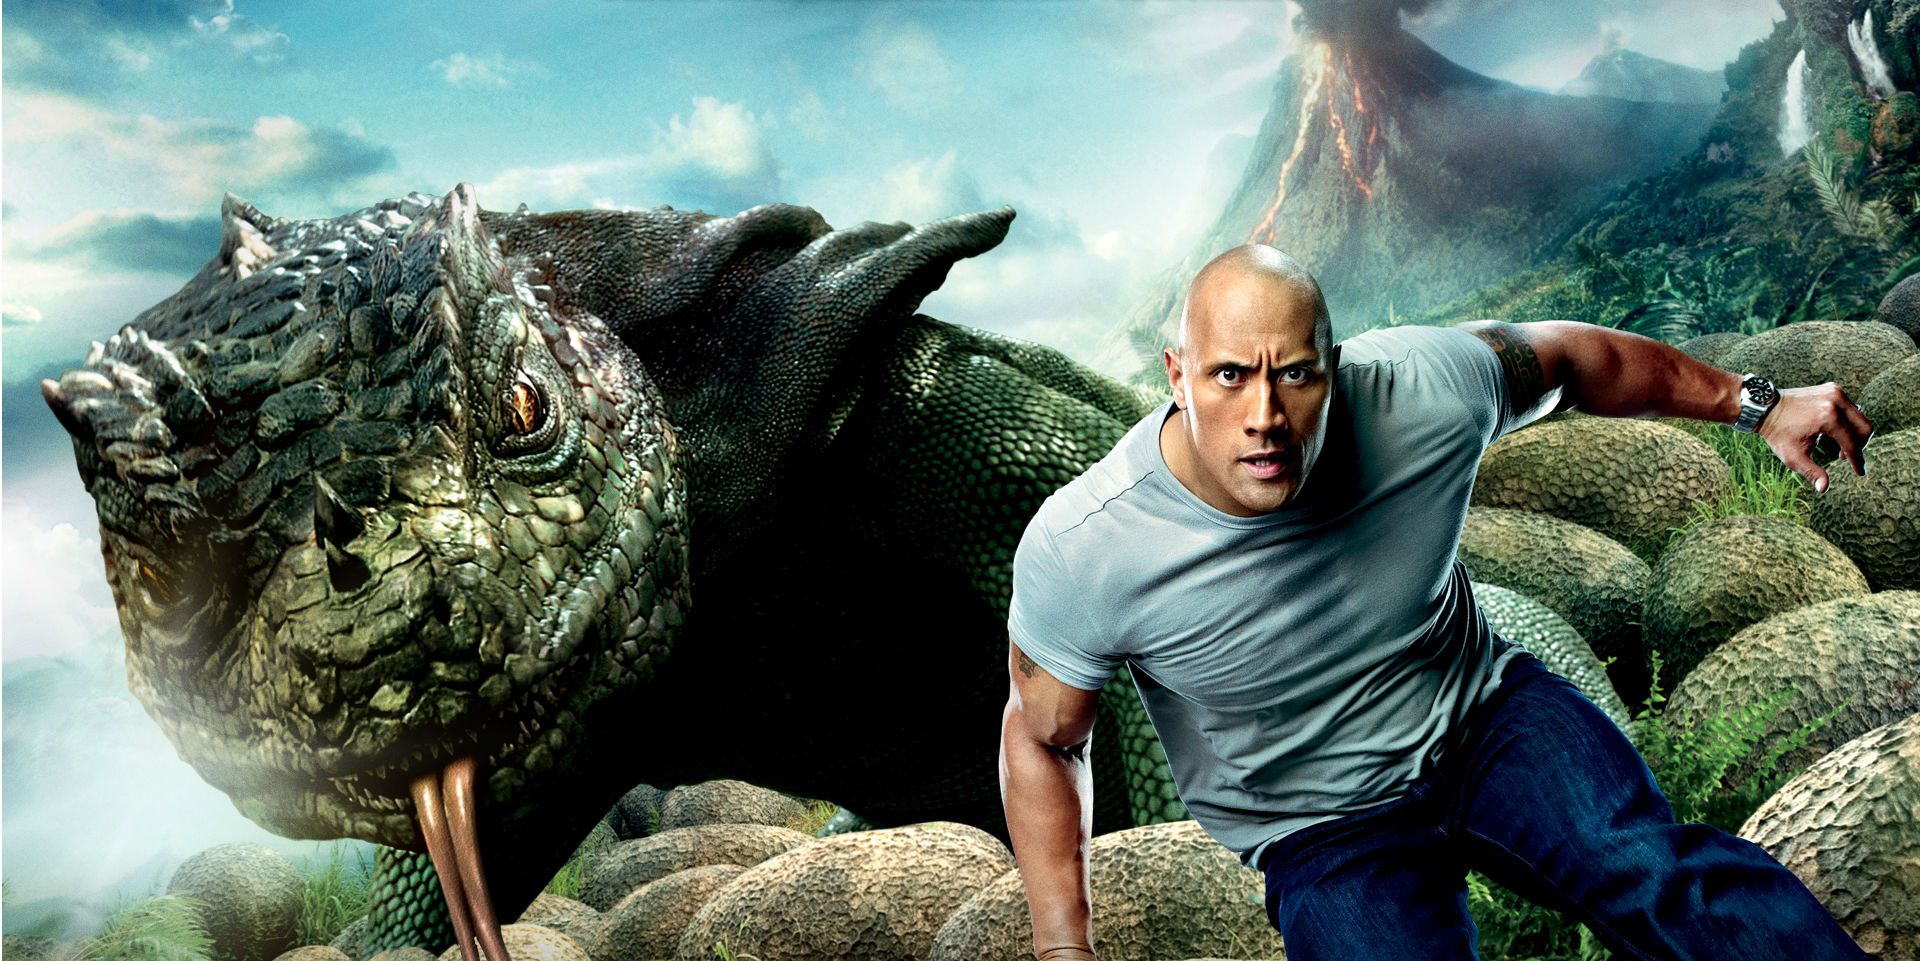 The Rock in Journey 2: The Mysterious Island